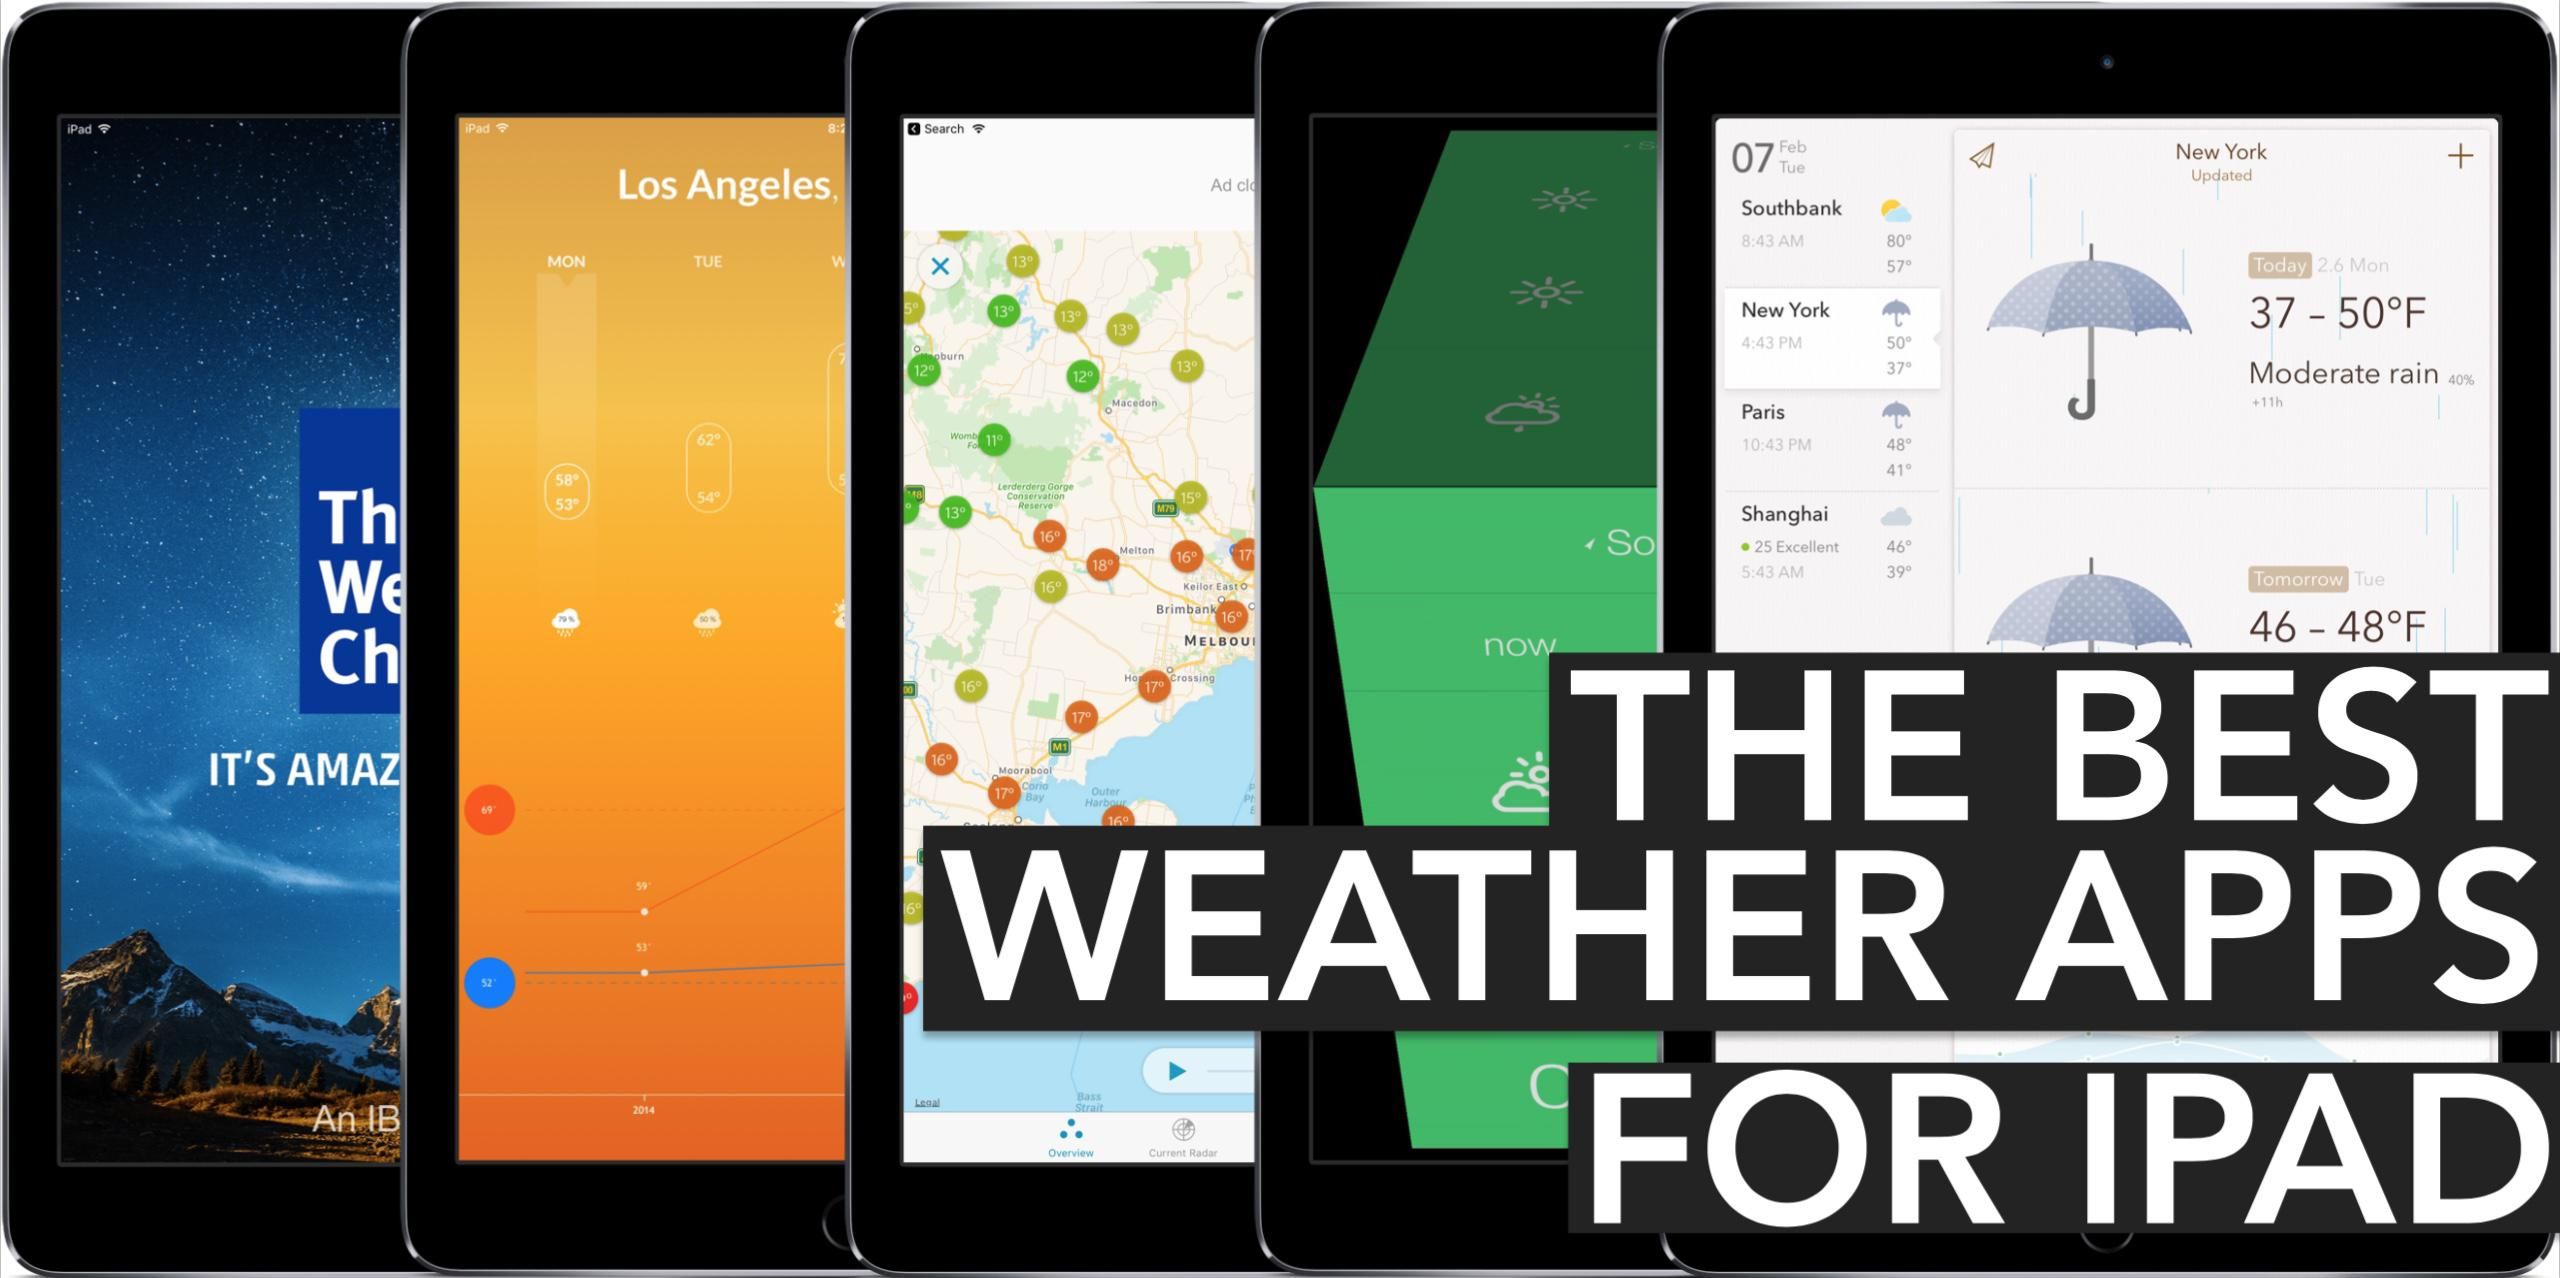 The Best Weather Apps For iPhone and iPad